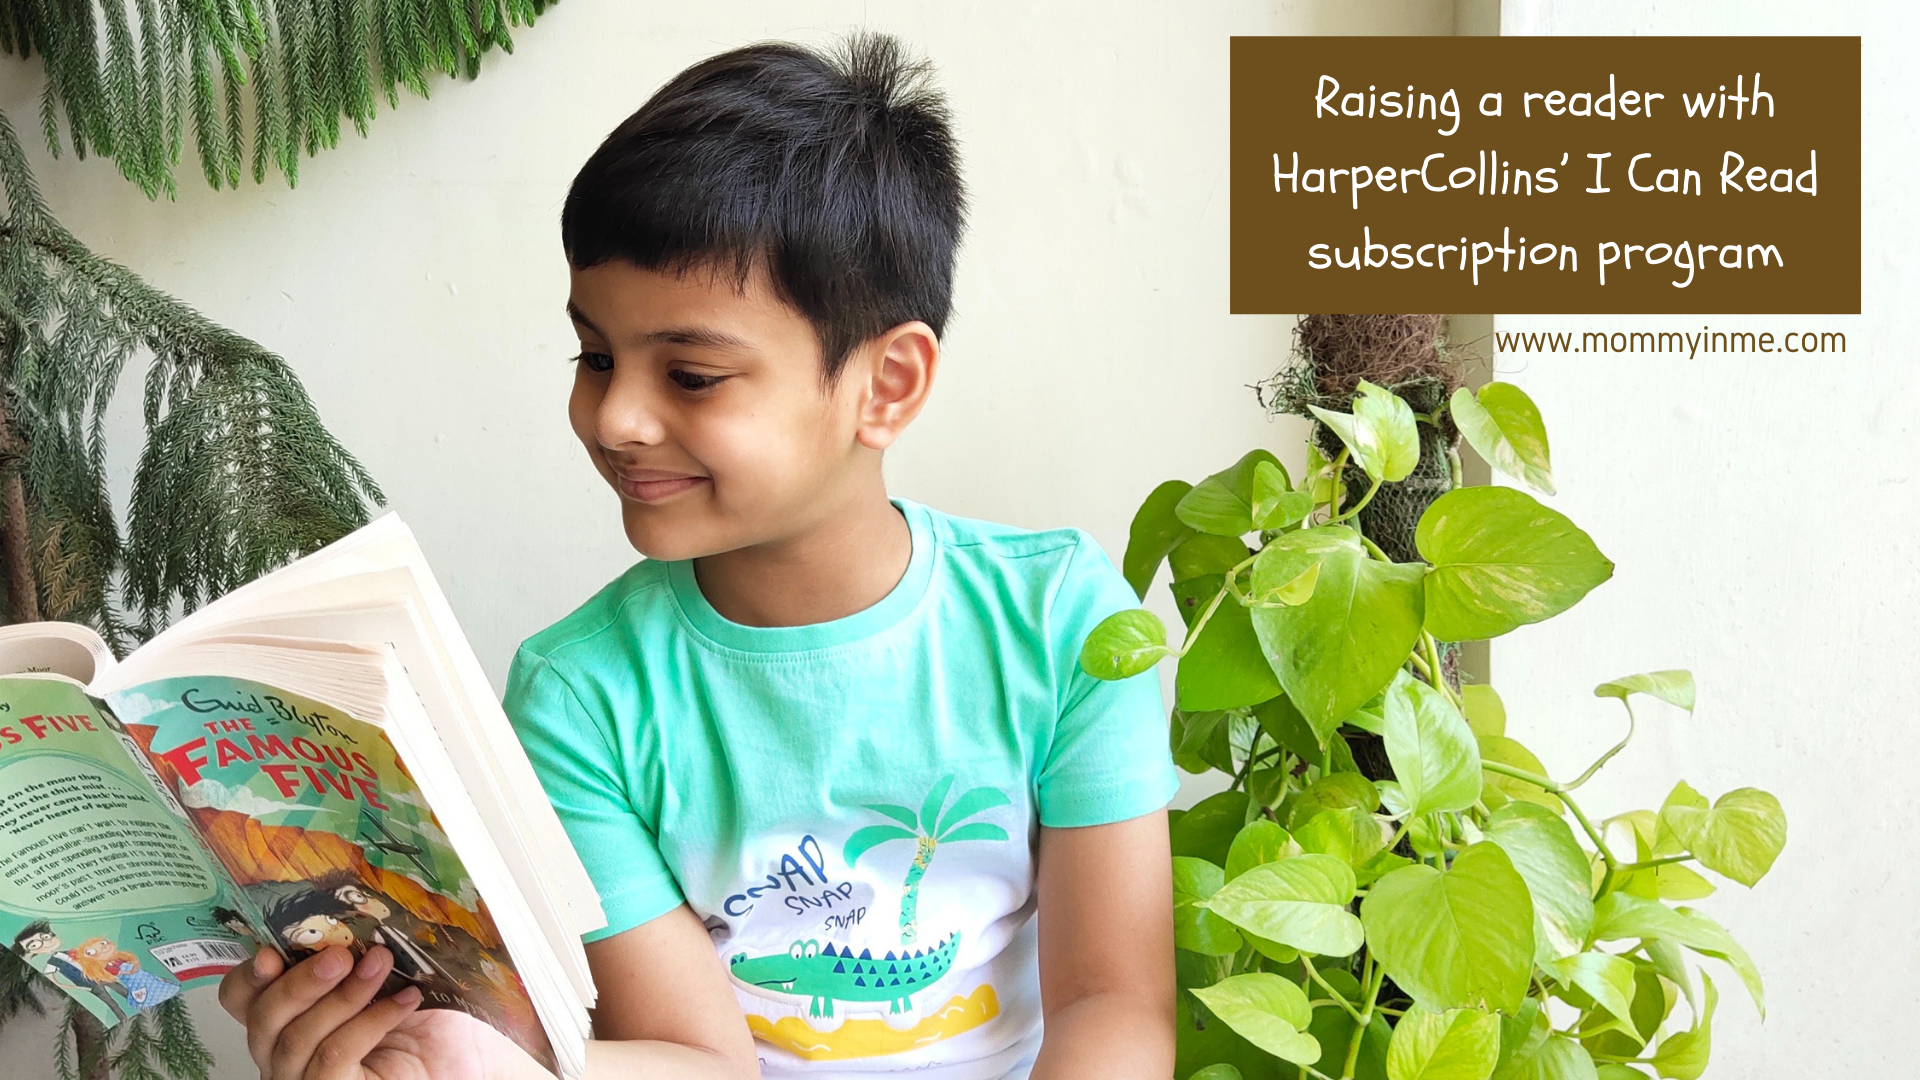 Introduce your child to reading with HarperCollins’ I Can Read subscription program